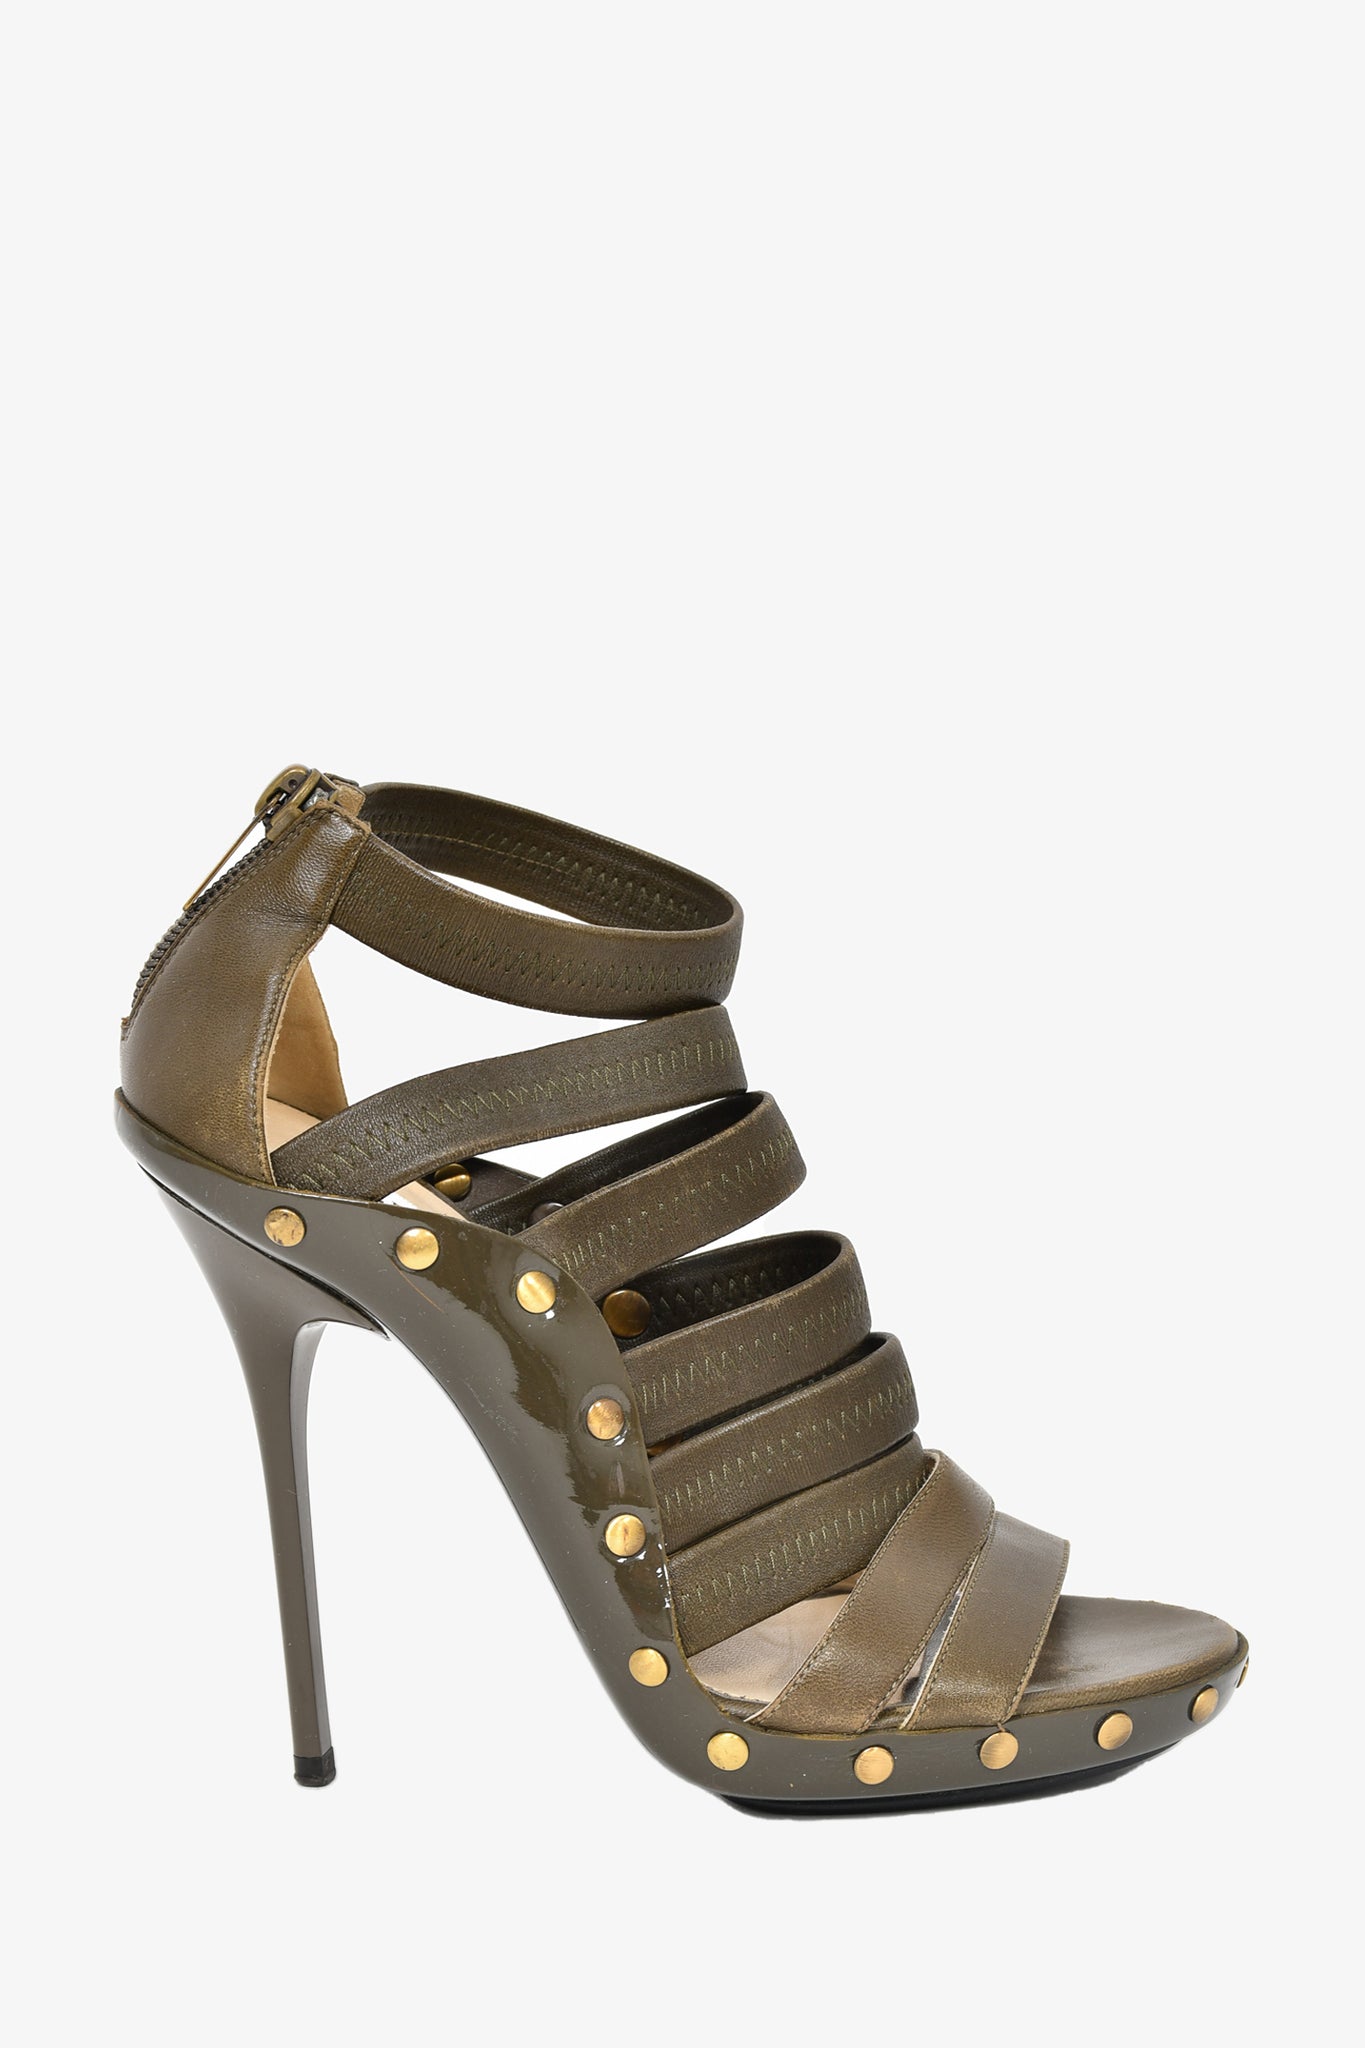 Jimmy Choo Olive Green Leather/Patent Gold Studded Strappy Heels sz 36.5